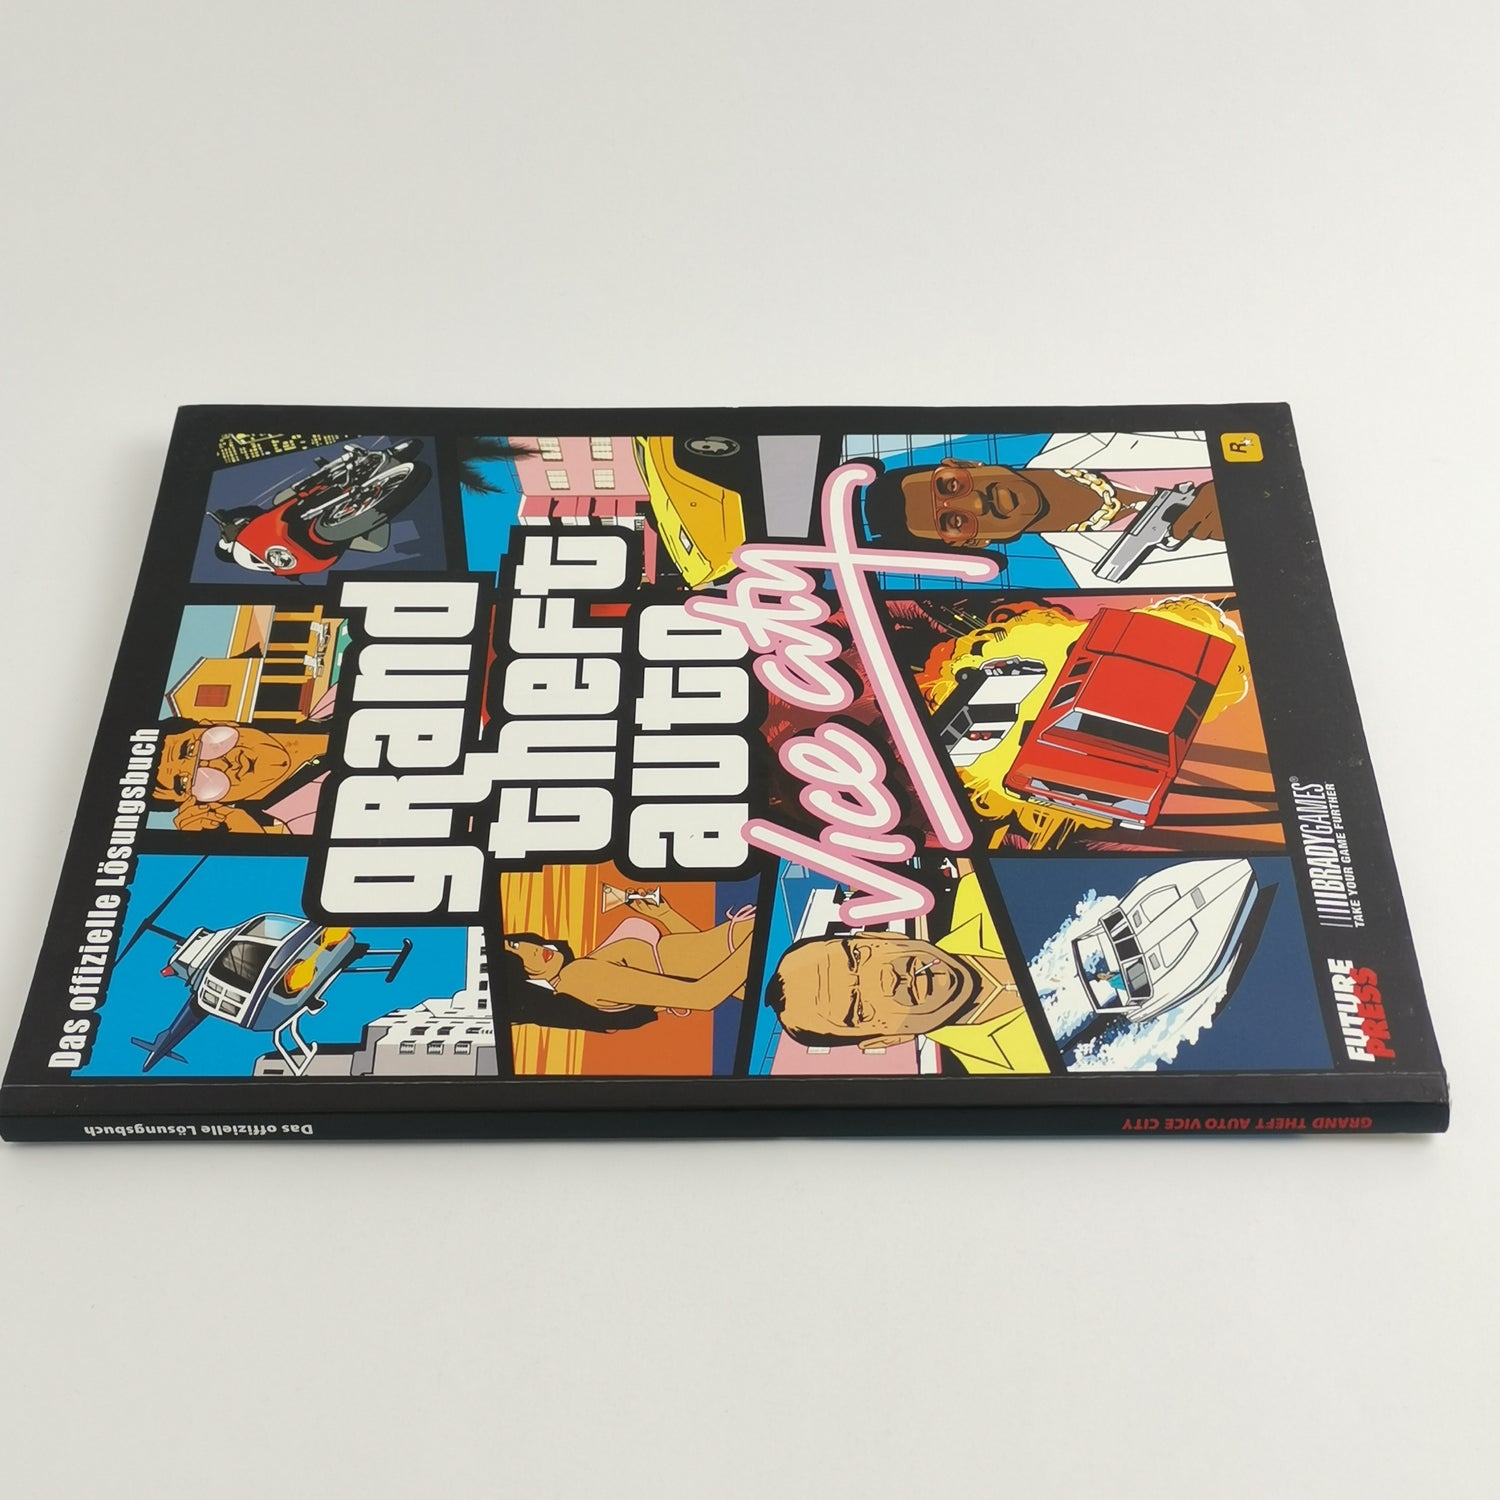 Sony Playstation 2 Spiel : Grand Theft Auto Vice City + Lösungsbuch | PS2 OVP